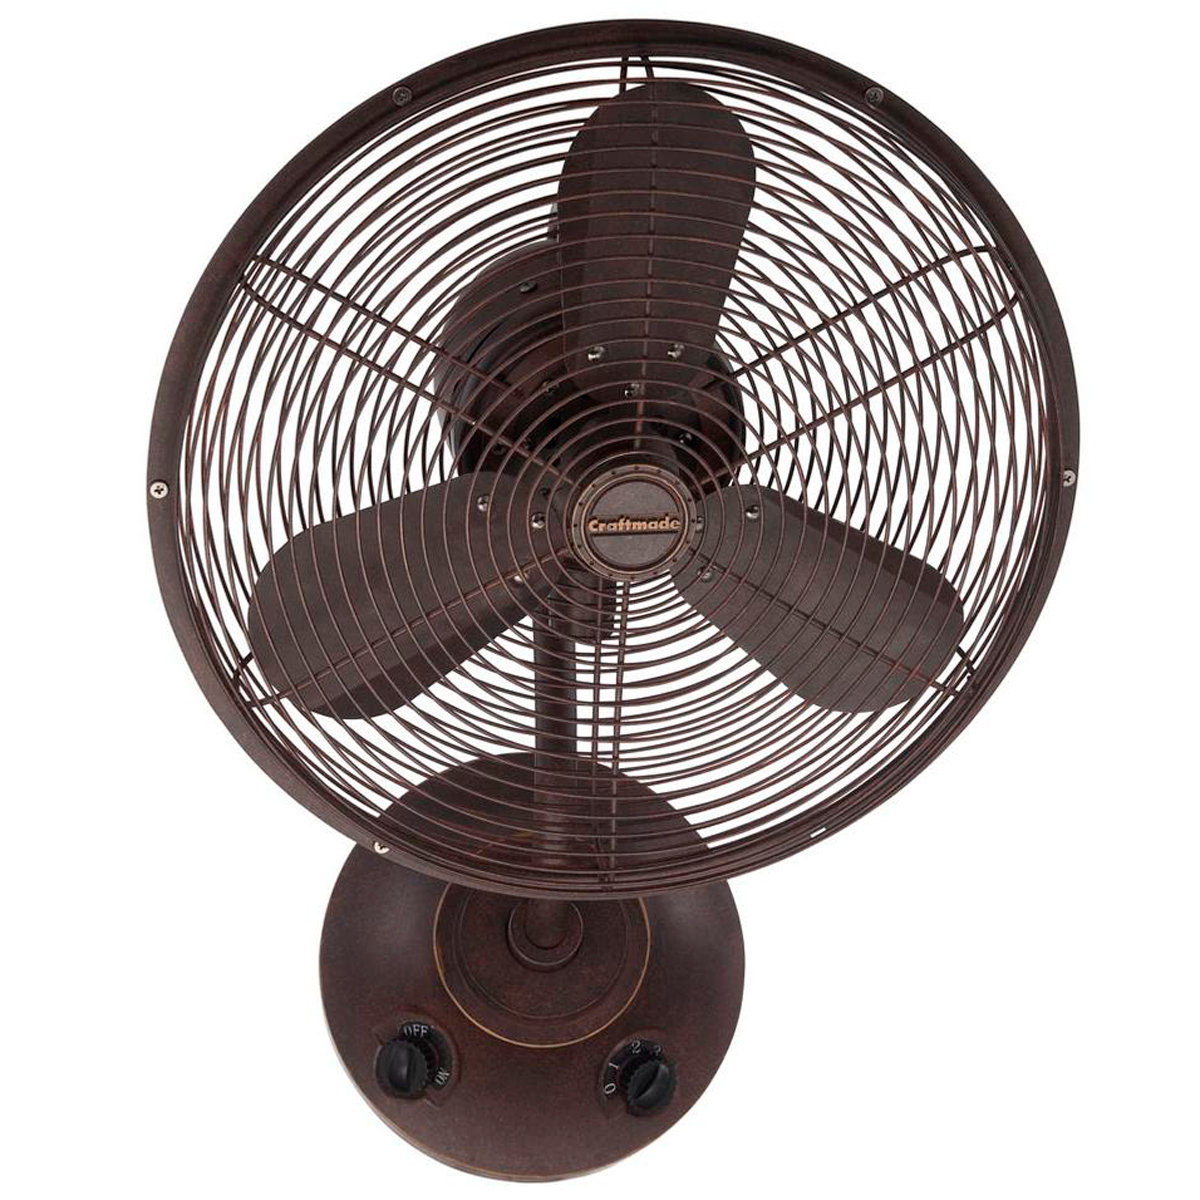 50 Decorative Wall Mount Fans You Ll Love In 2020 Visual Hunt